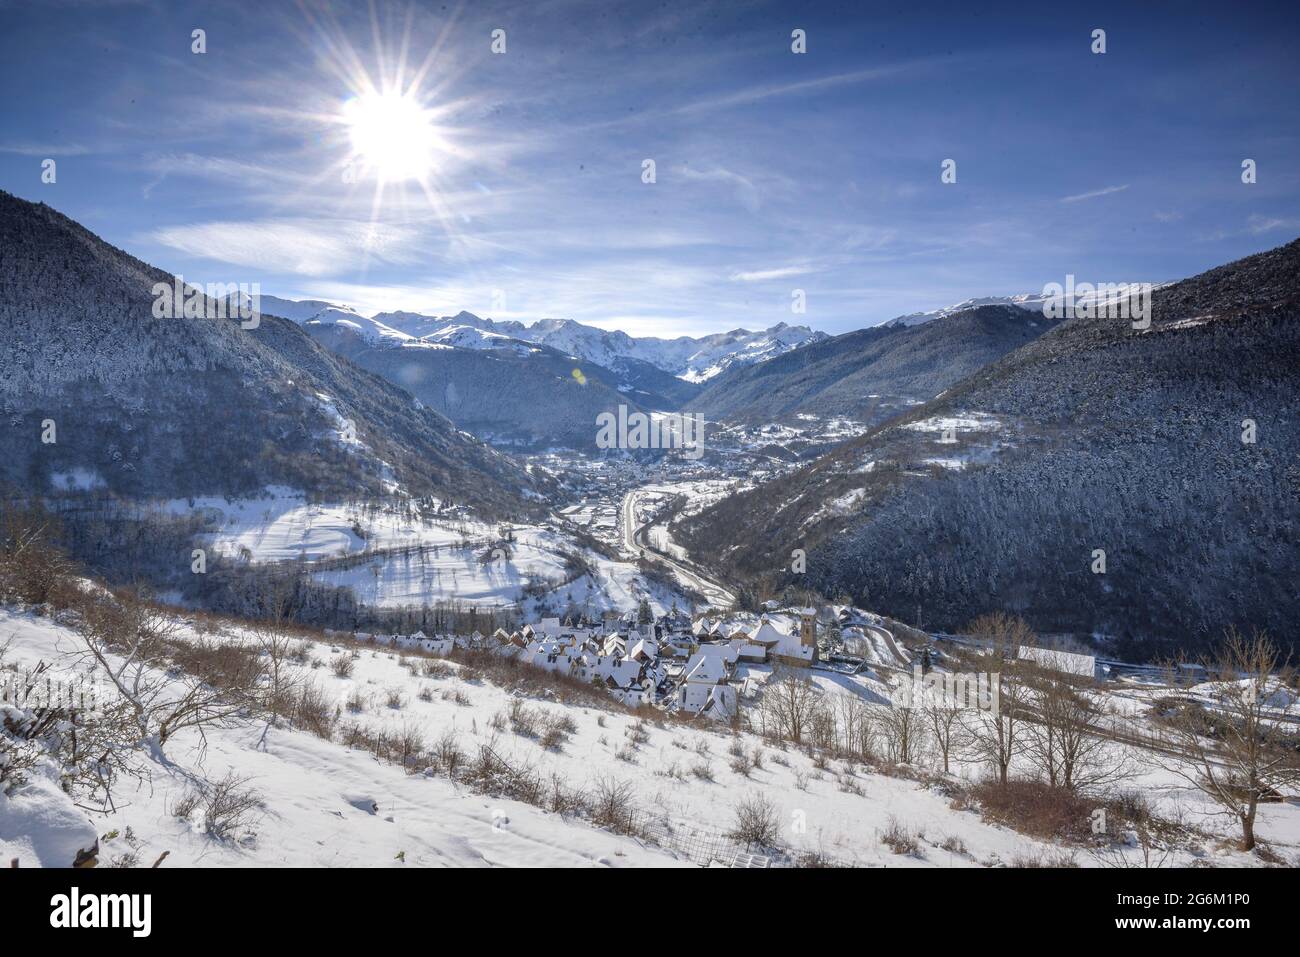 Vielha and Mijaran valley seen from the village of Mont, after a winter snowfall (Aran Valley, Catalonia, Spain, Pyrenees) Stock Photo